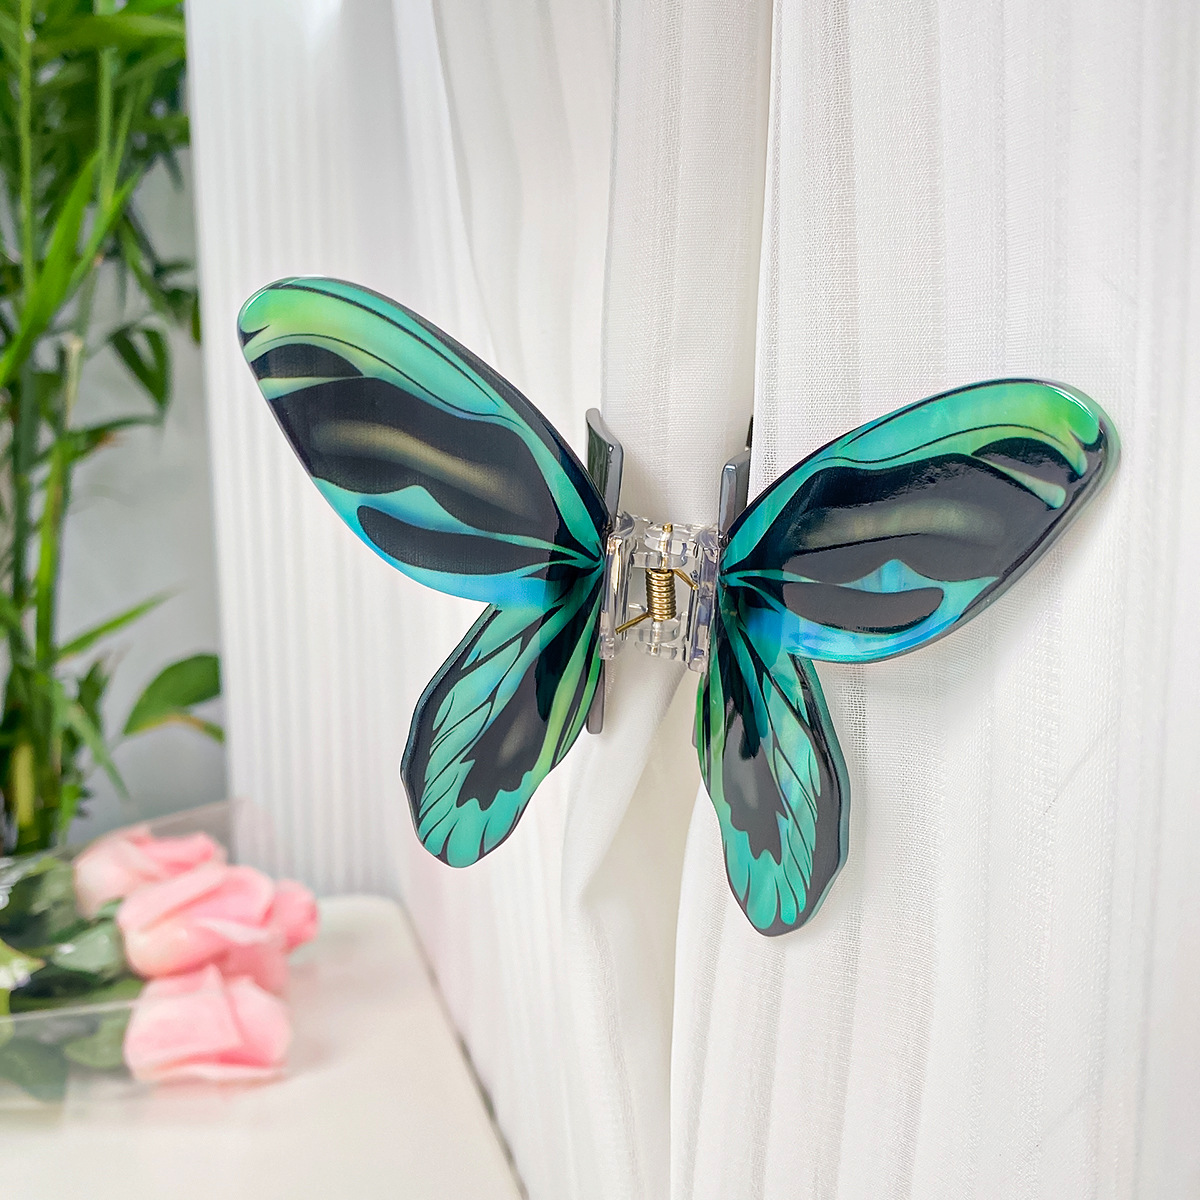 4:Blue and green Morpho butterfly